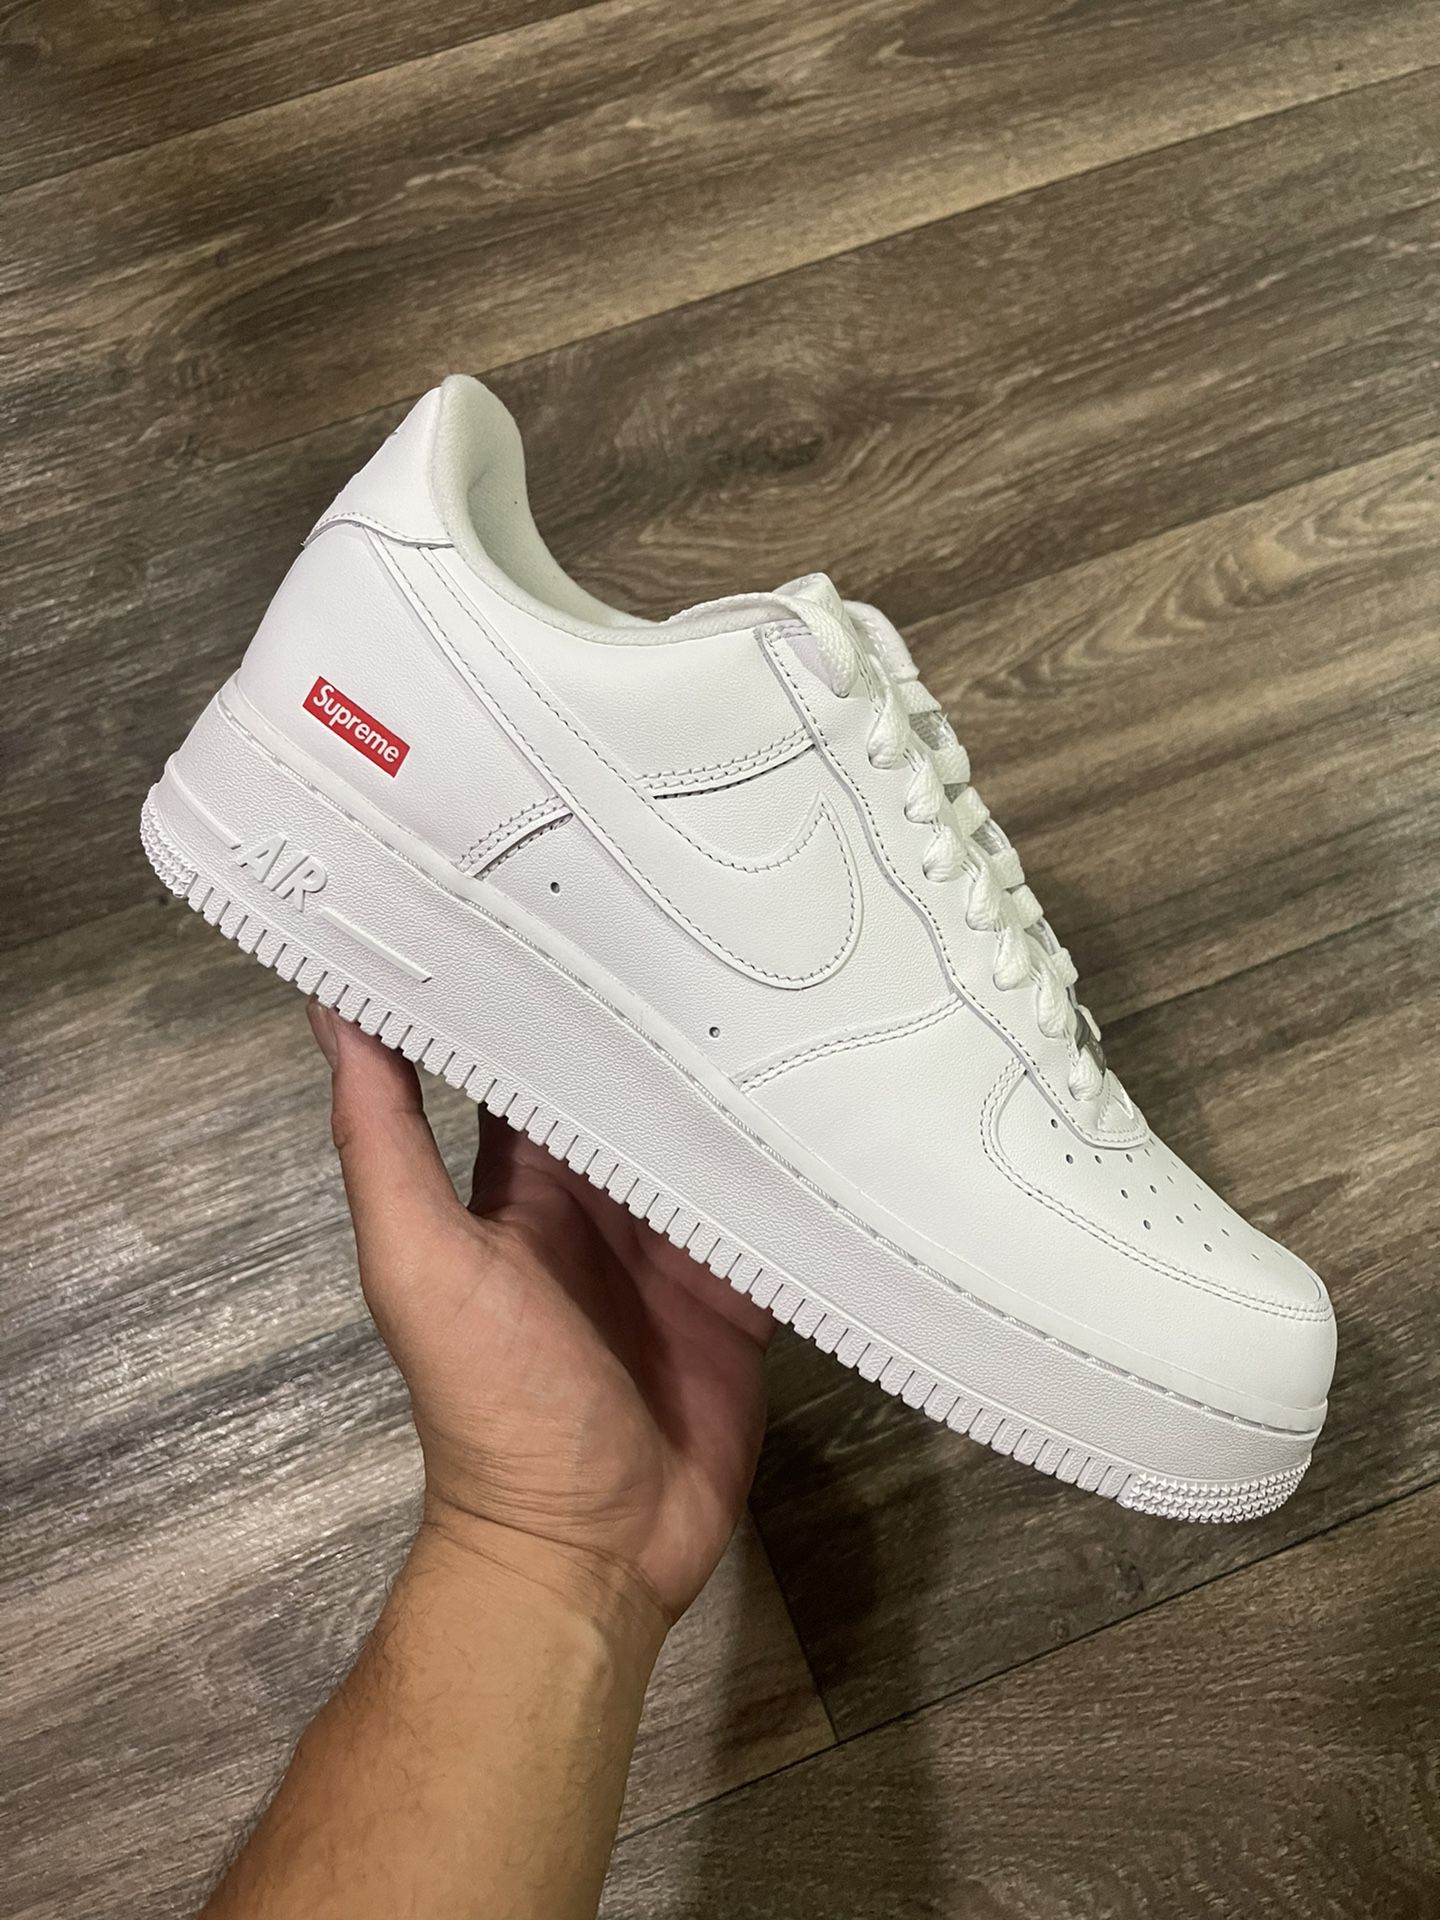 Nike Supreme Air Force 1 Blk Size 9 for Sale in Garland, TX - OfferUp